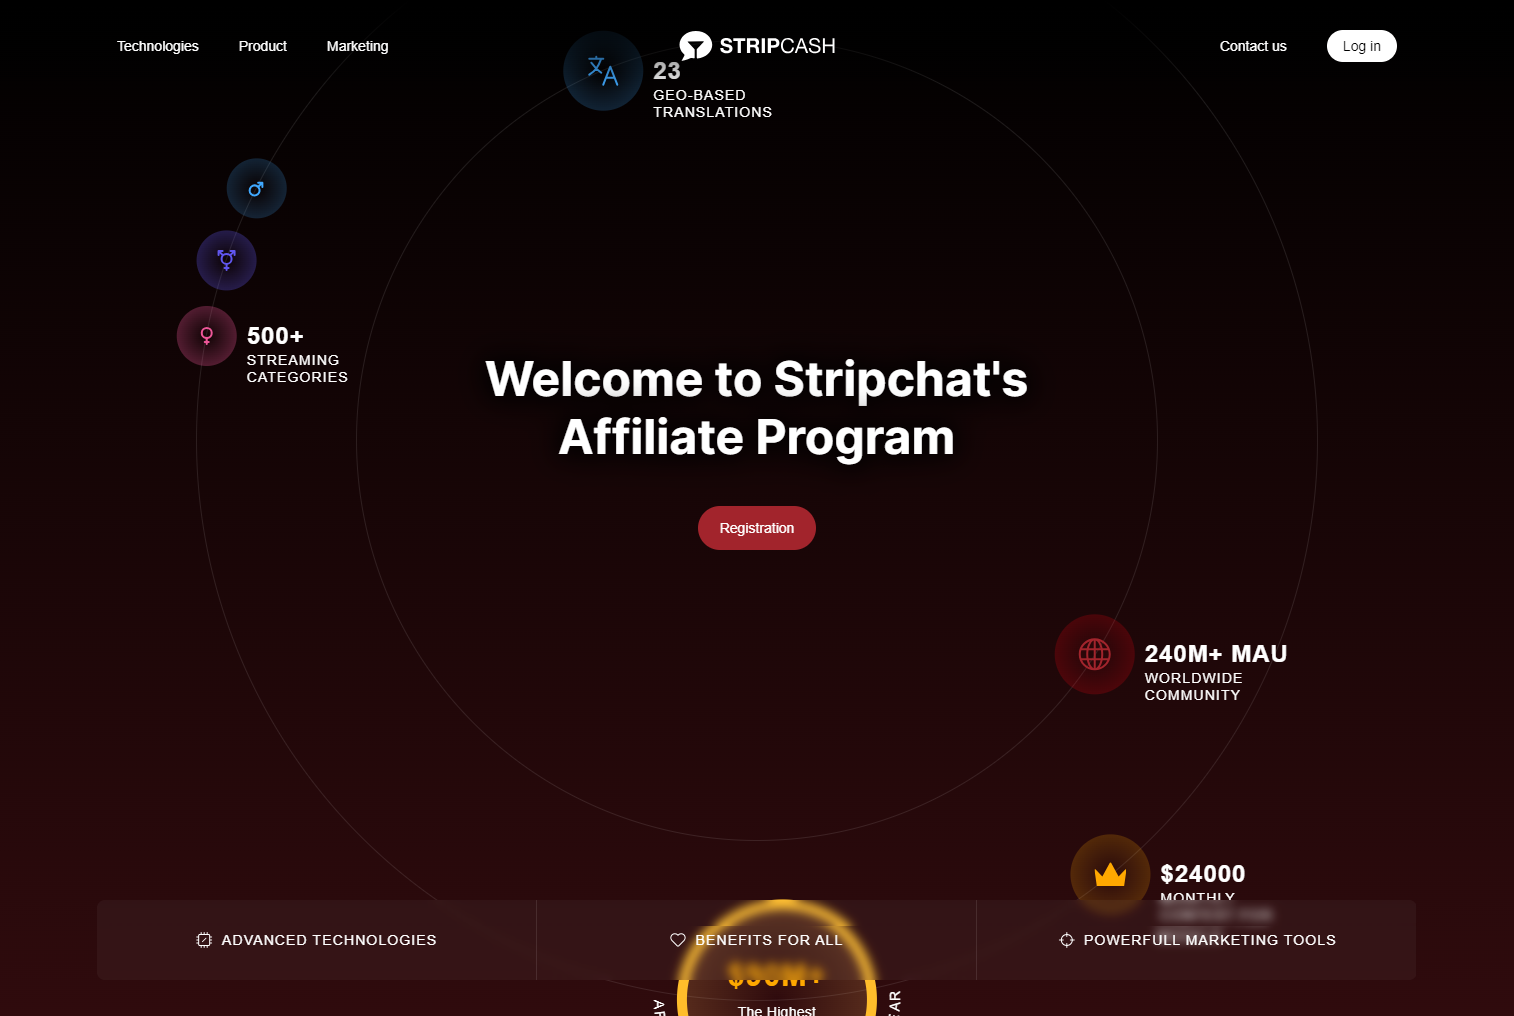 Stripcash Affiliate Network Review and Testimonials